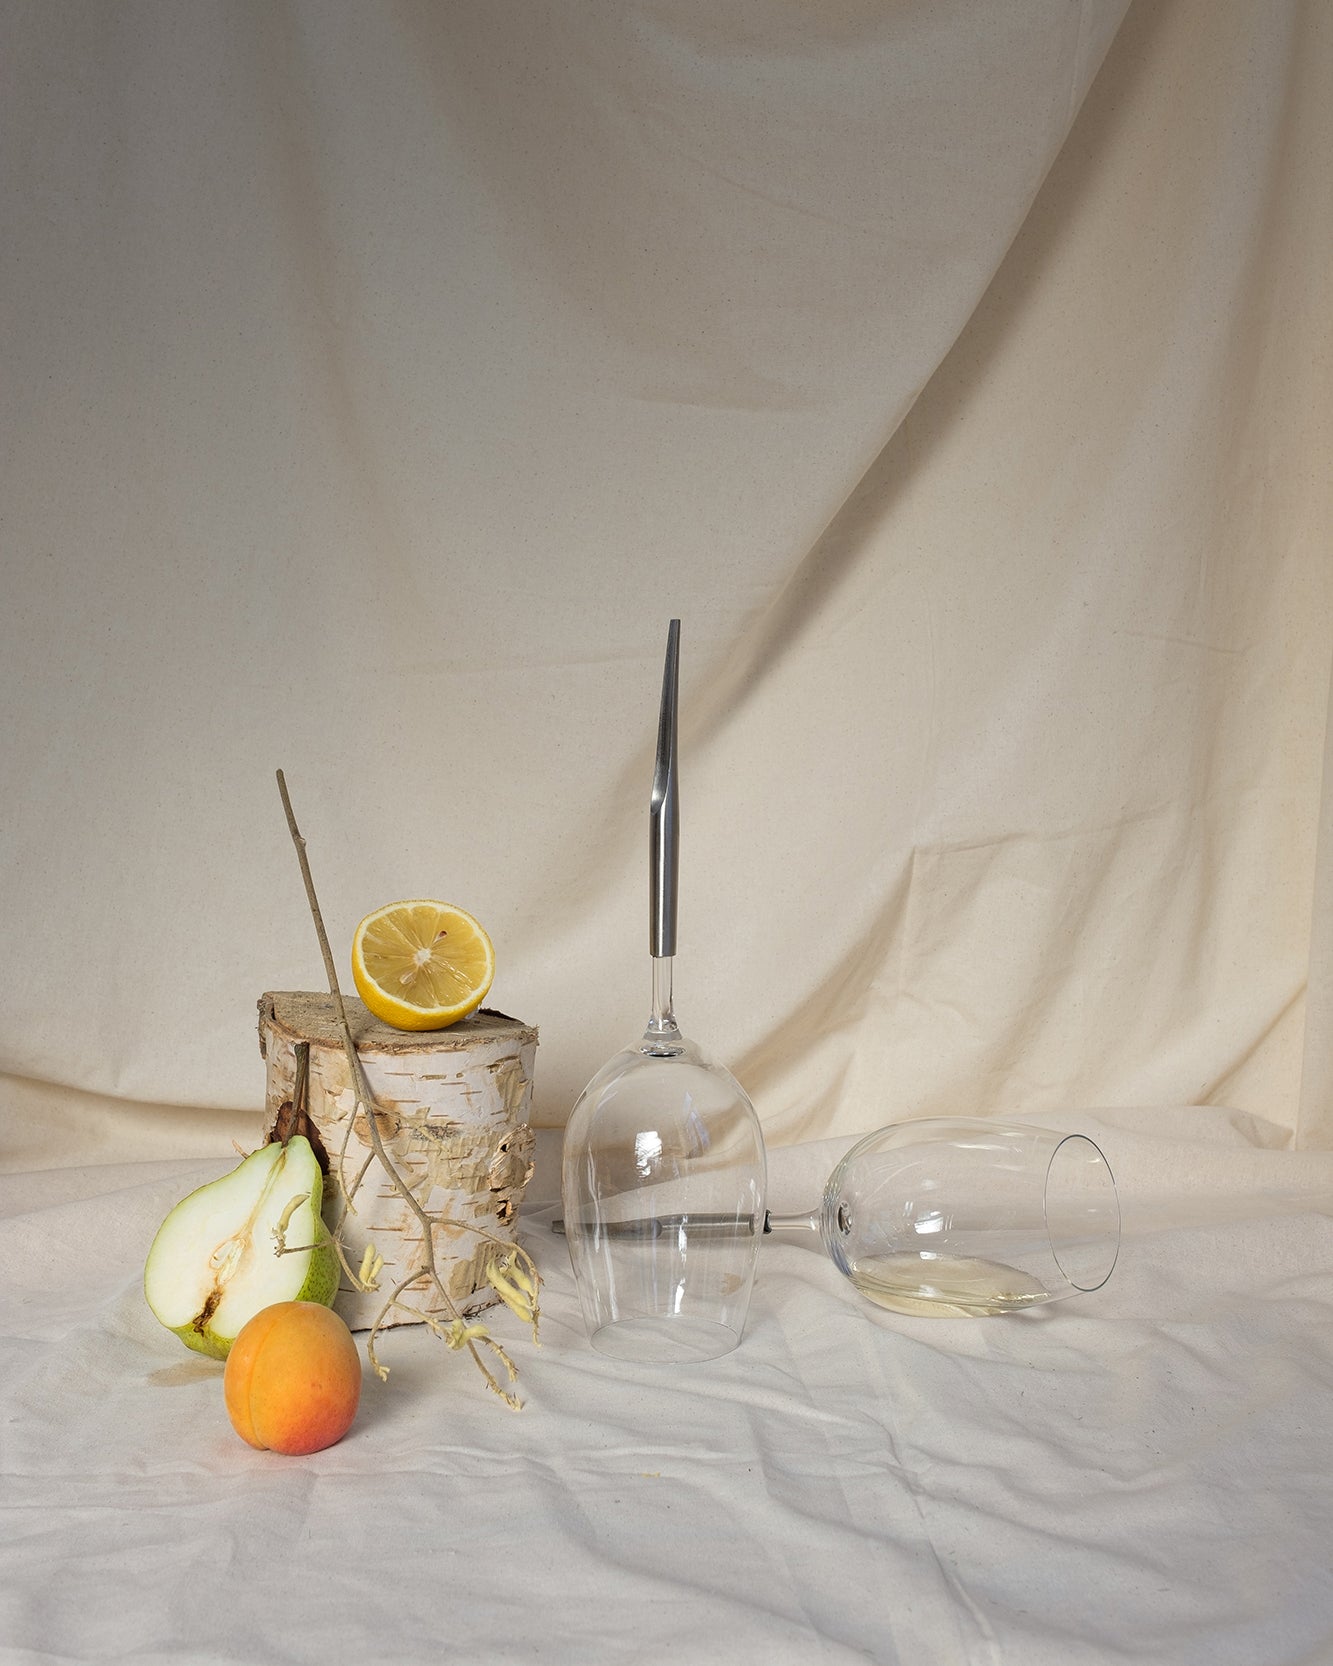 2 picnic wine glasses for white wine on a table cloth next to an apricot, half a pear and half a lemon; one picnic glass is upside down, the other one is horizontal and half full of wine